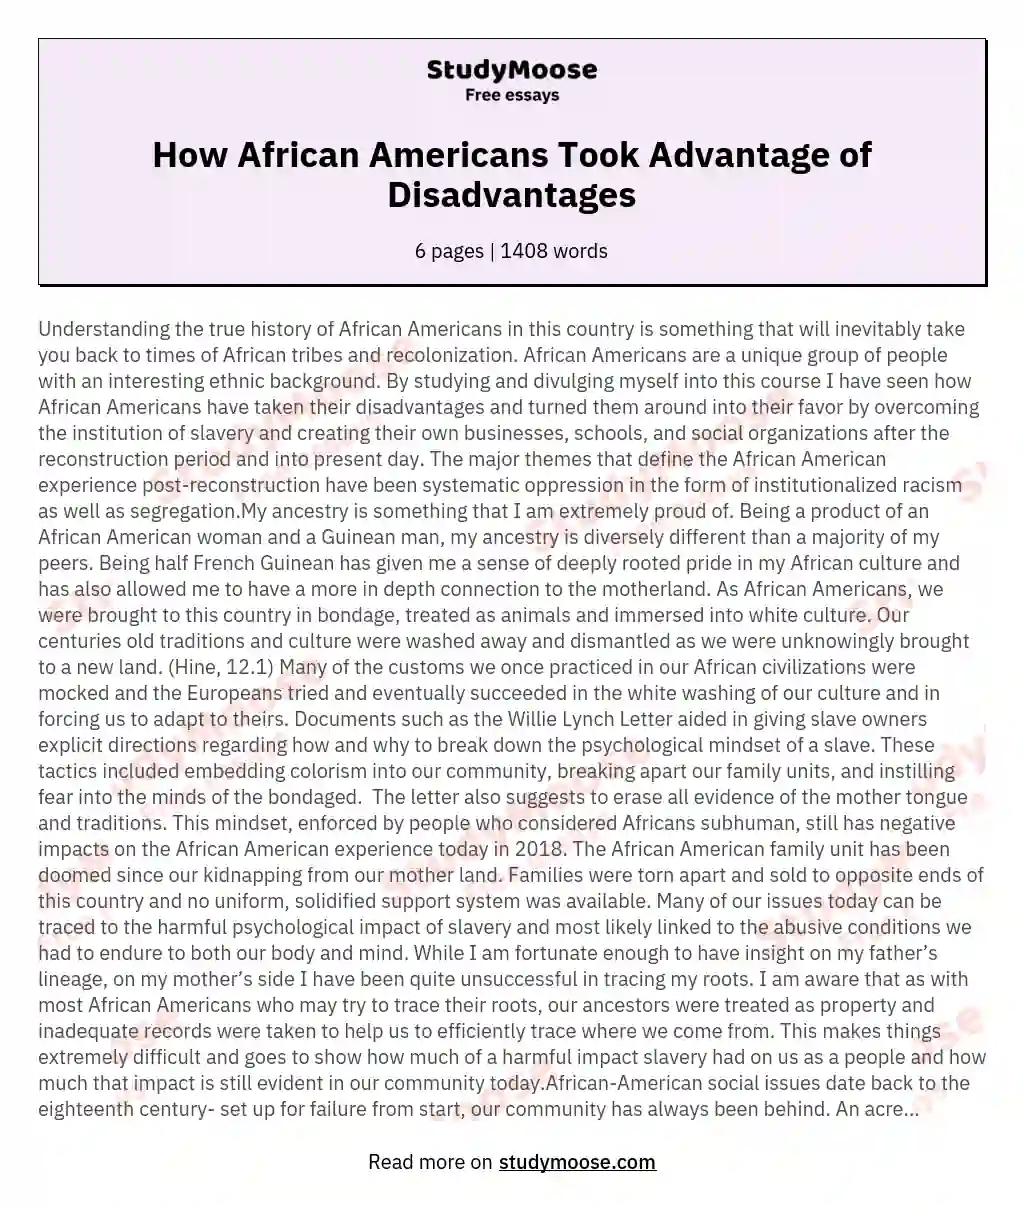 How African Americans Took Advantage of Disadvantages essay